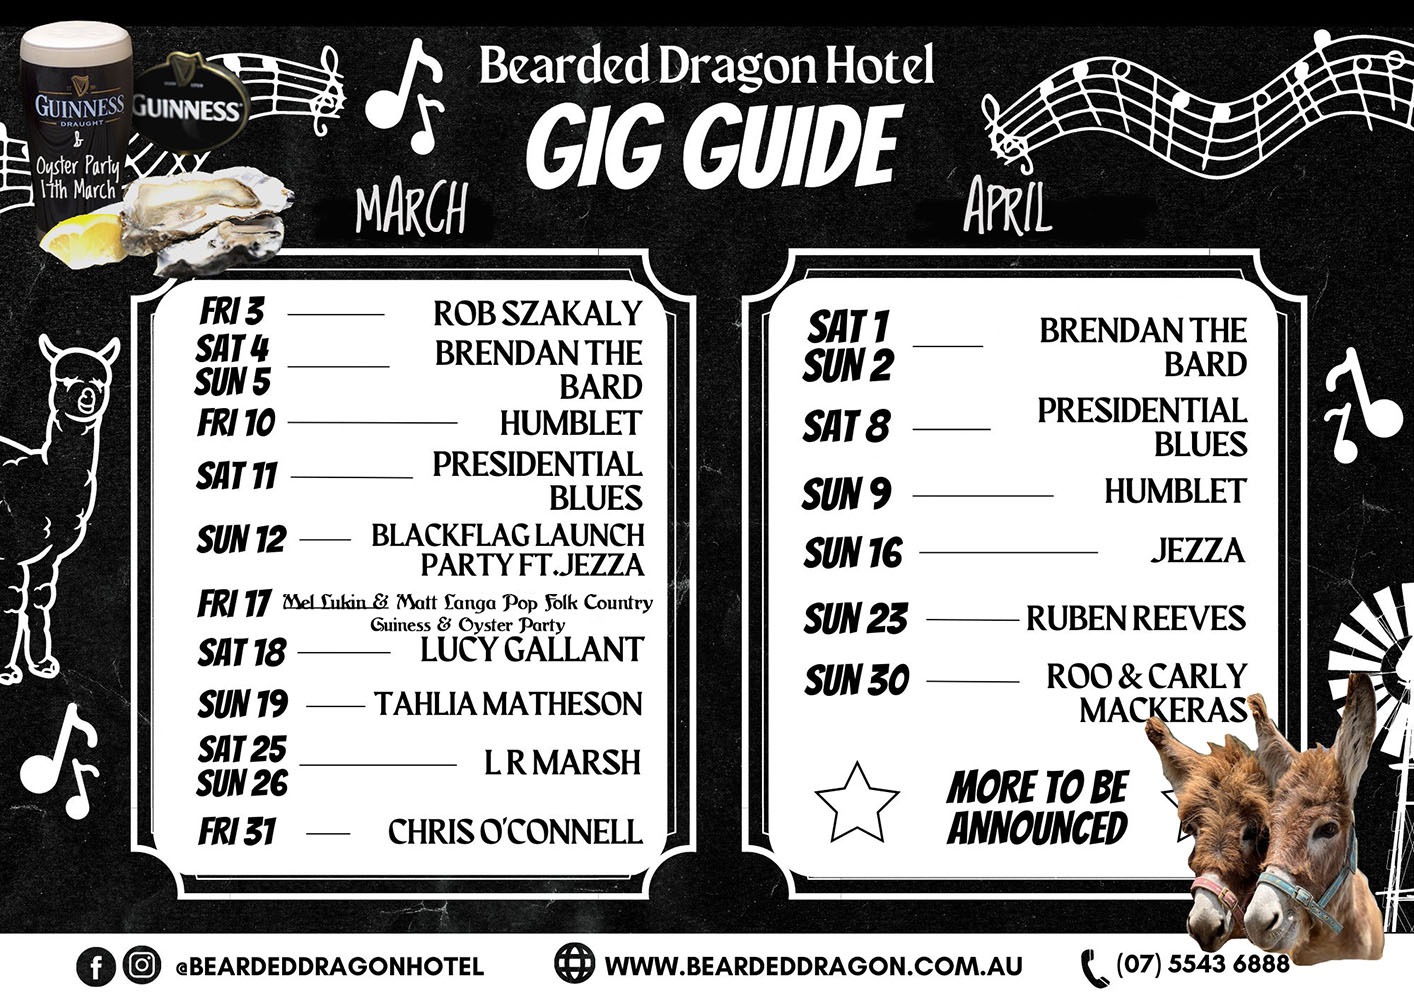 Bearded Dragon Gig Guide - March